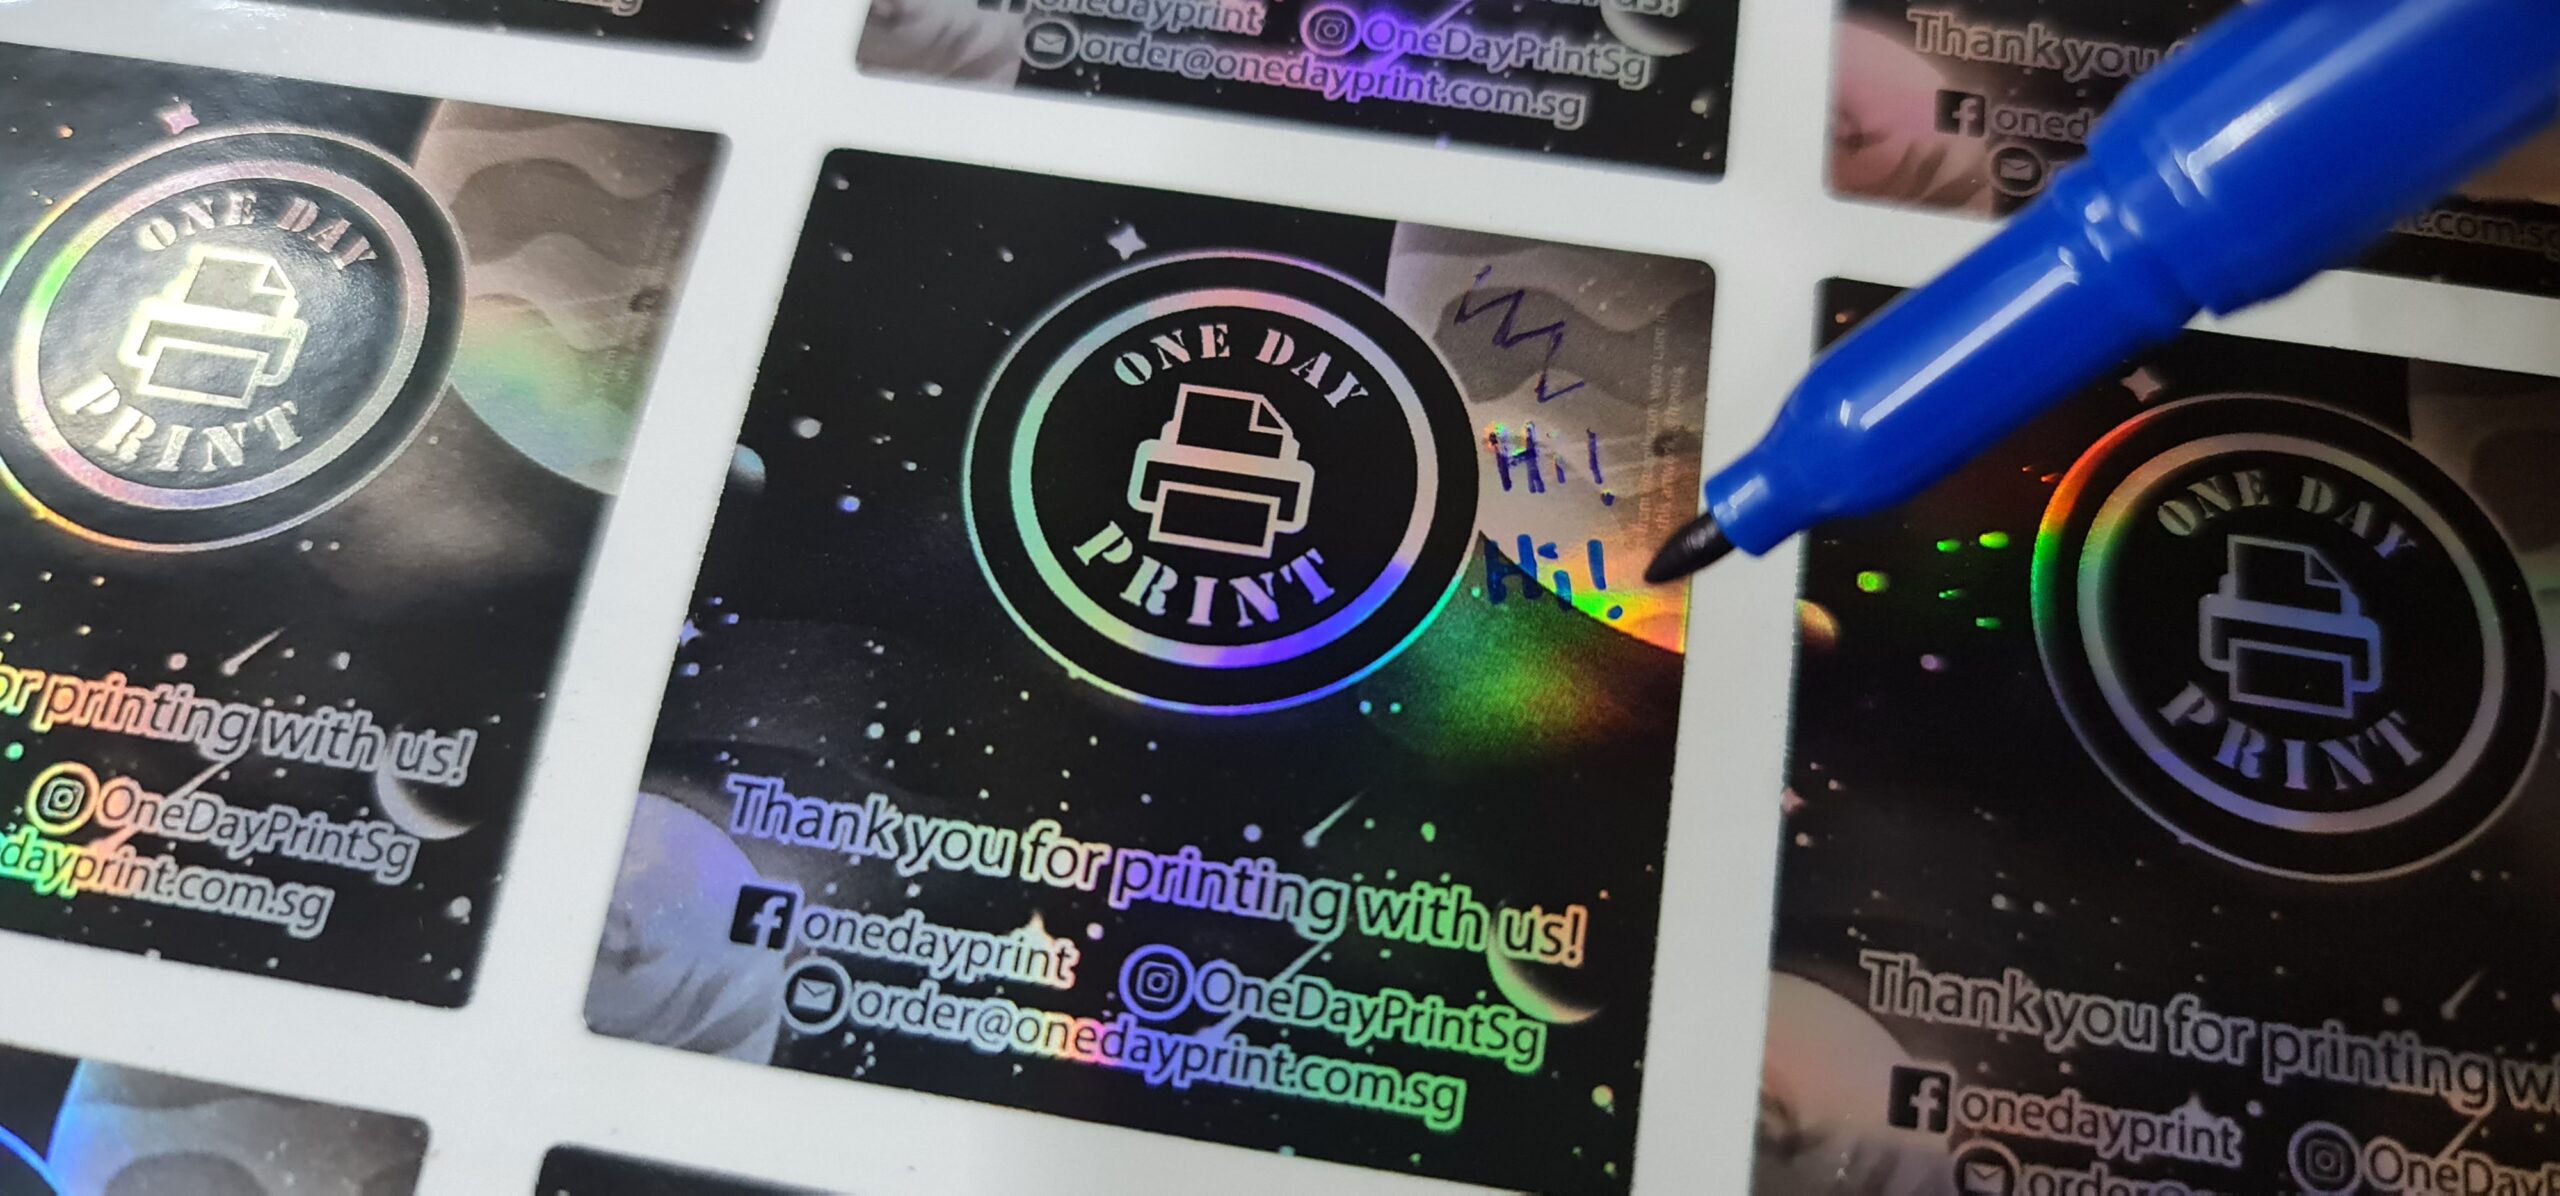 Rounded Square Shape Stickers, Holographic PVC Sticker Material, writable with pen or marker, Kiss-cut on sheet